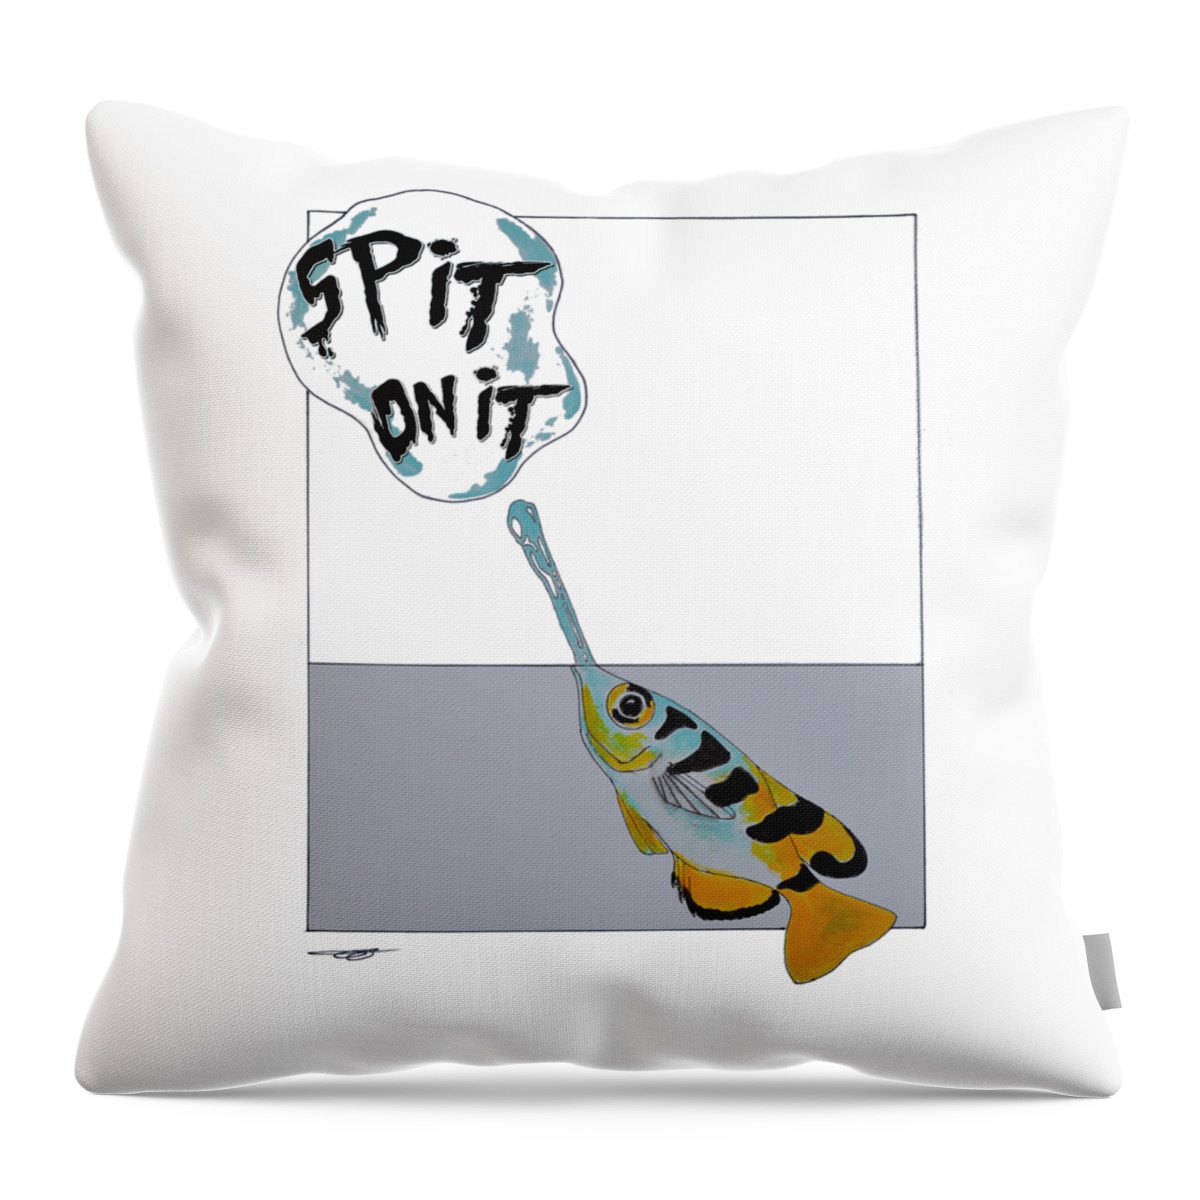 Archerfish Throw Pillow featuring the drawing Spit on it by Eduard Meinema